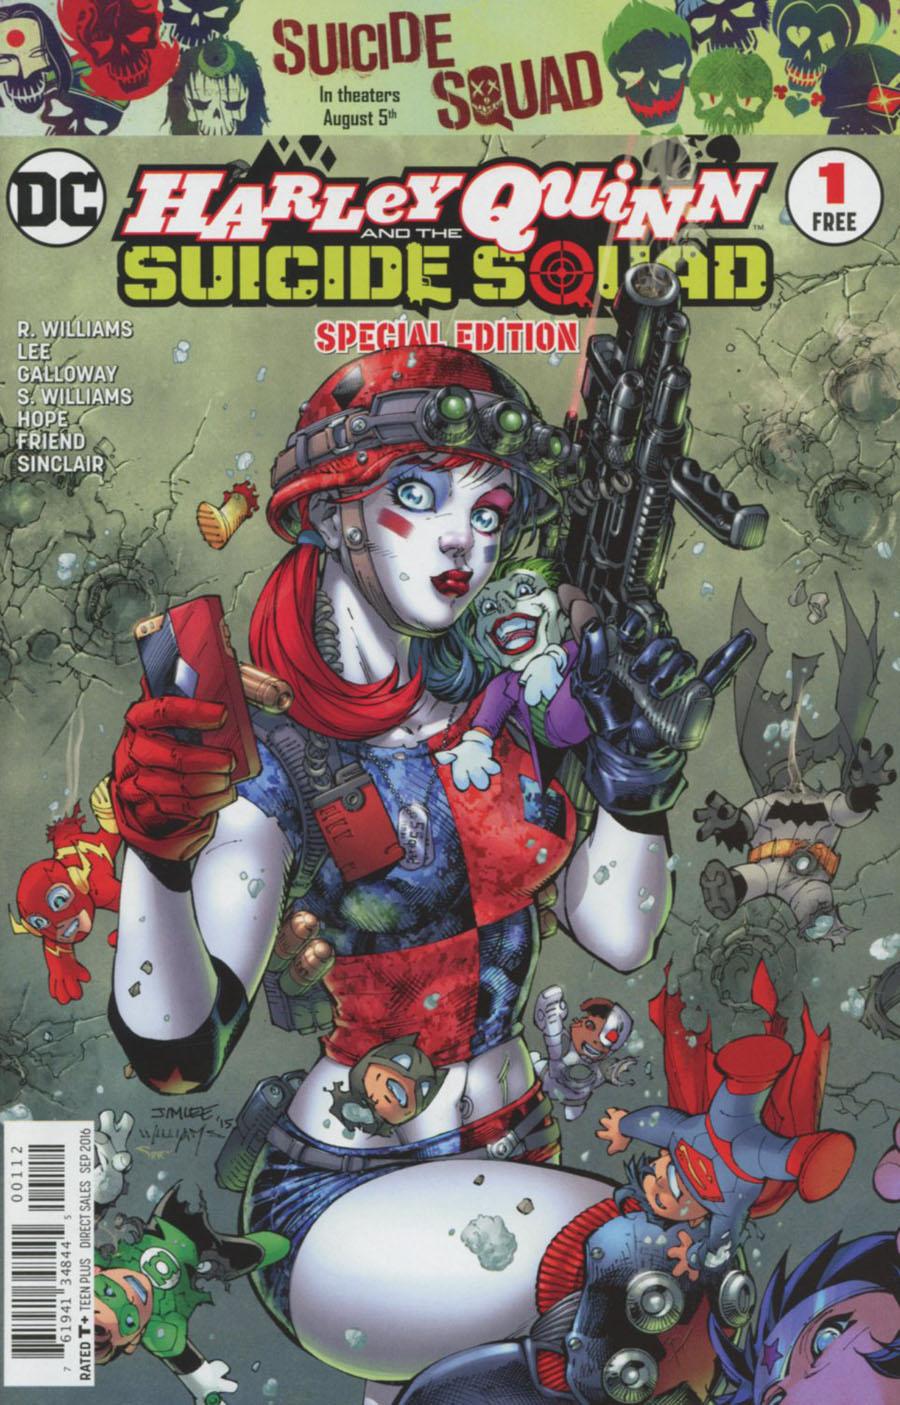 Harley Quinn And The Suicide Squad Special Edition Vol. 1 #1